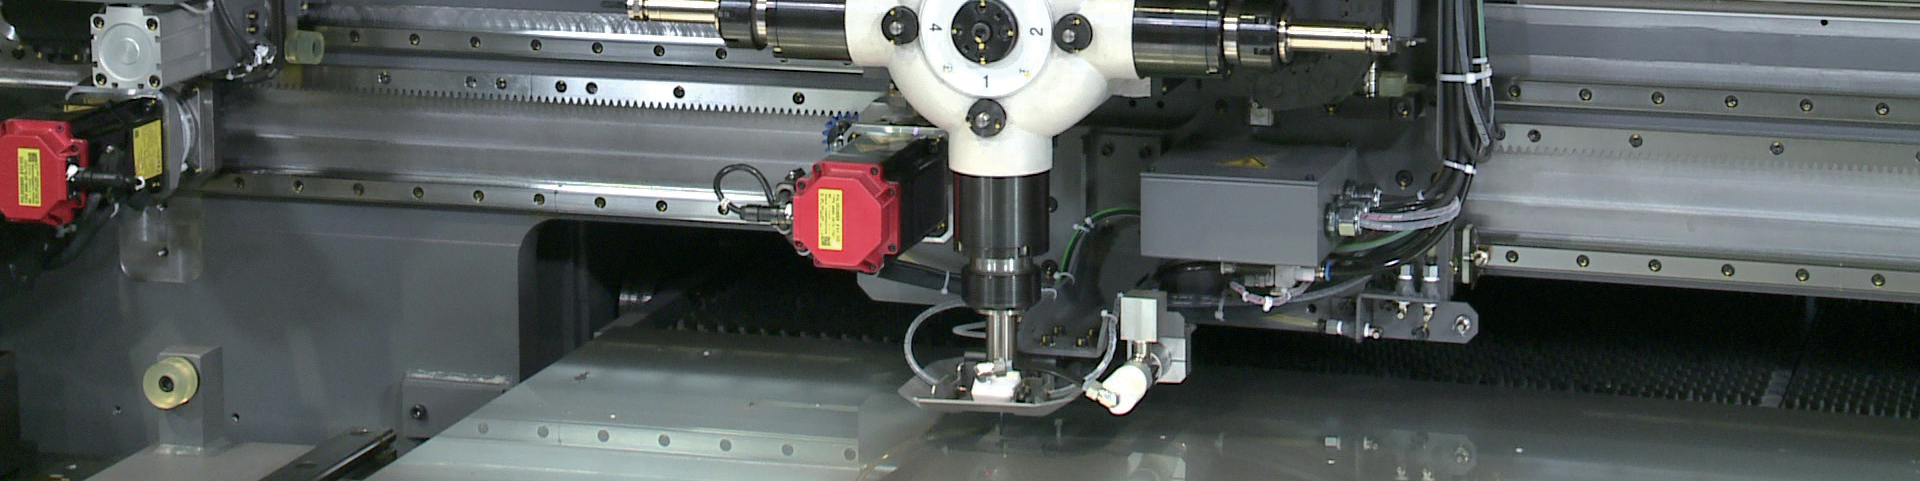 Muratec Advanced Hybric Laser Tapping Station